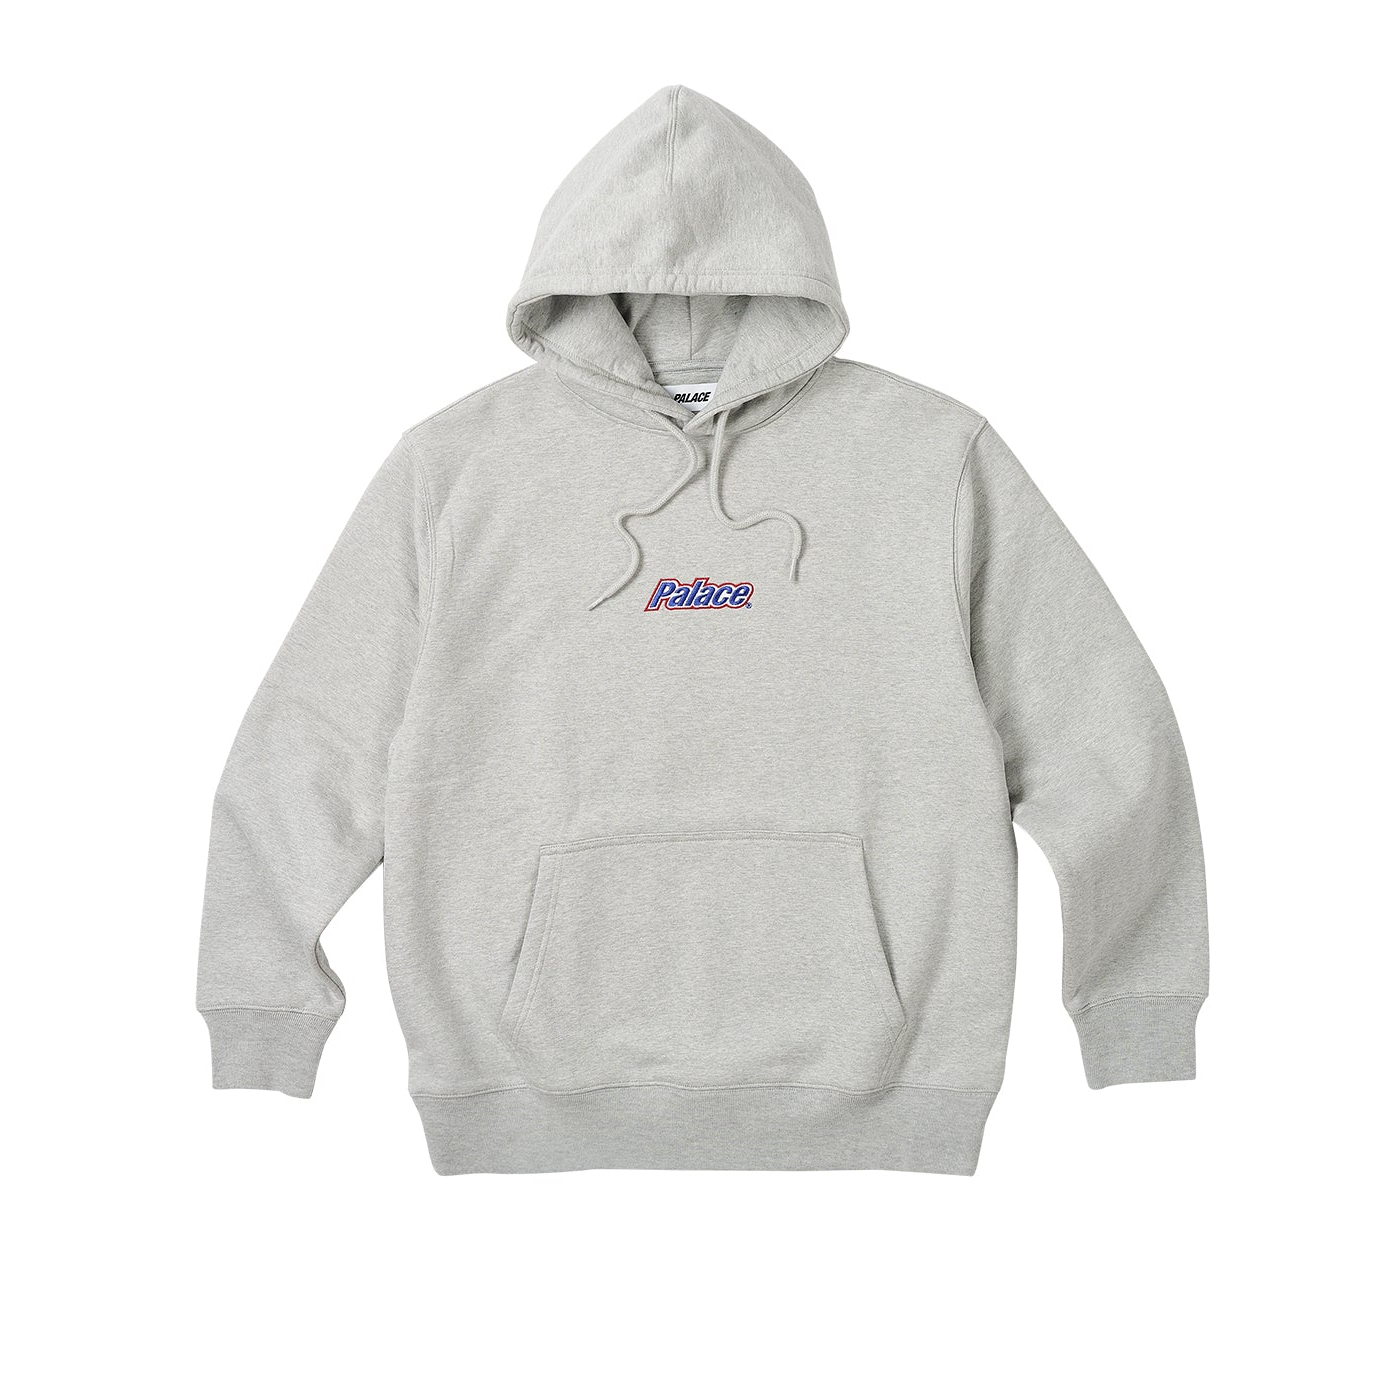 Thumbnail CURRENT HOOD GREY MARL one color